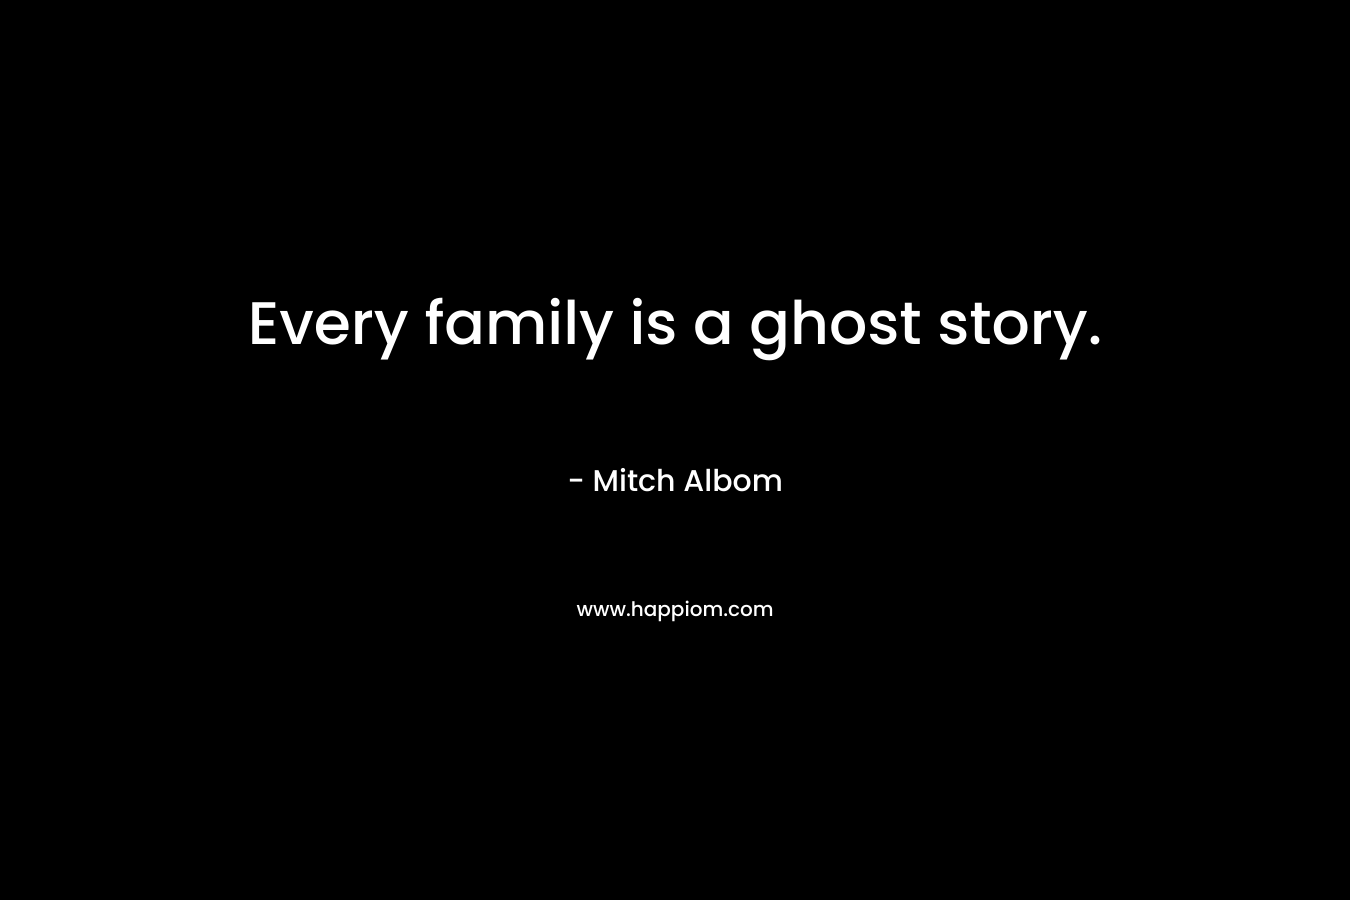 Every family is a ghost story.